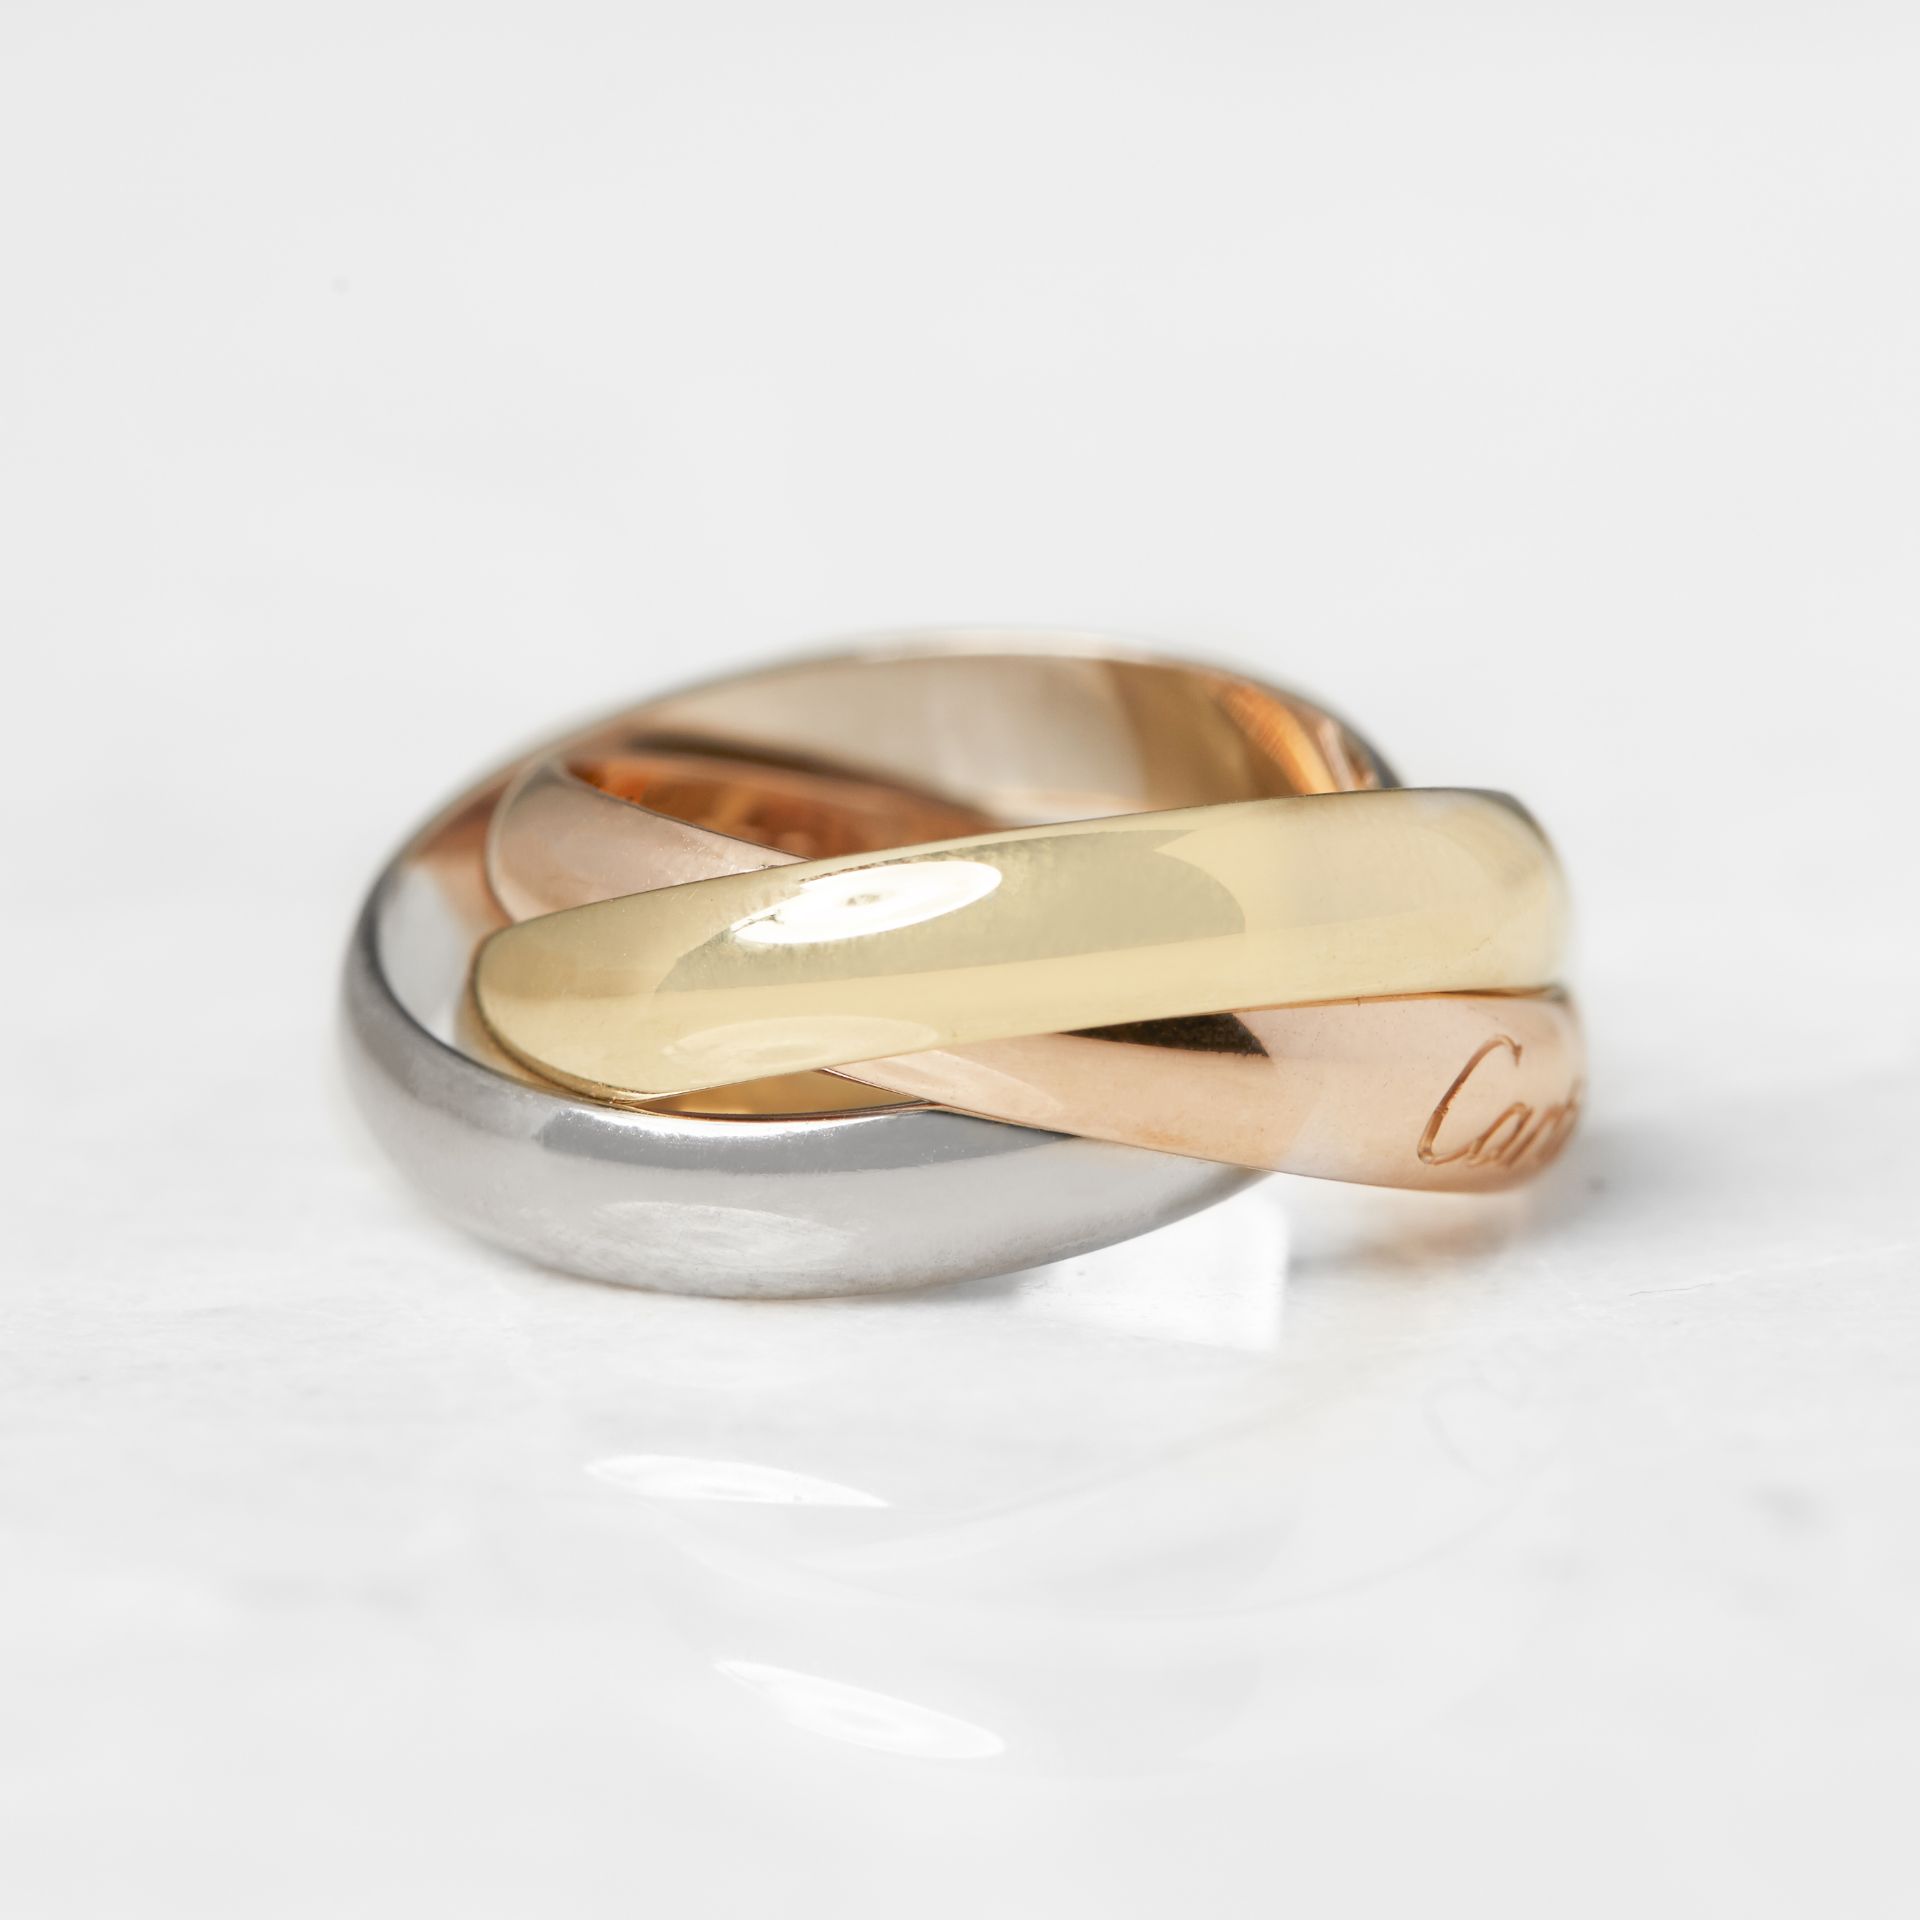 Cartier 18k Yellow, White & Rose Gold Trinity Ring - Image 7 of 17